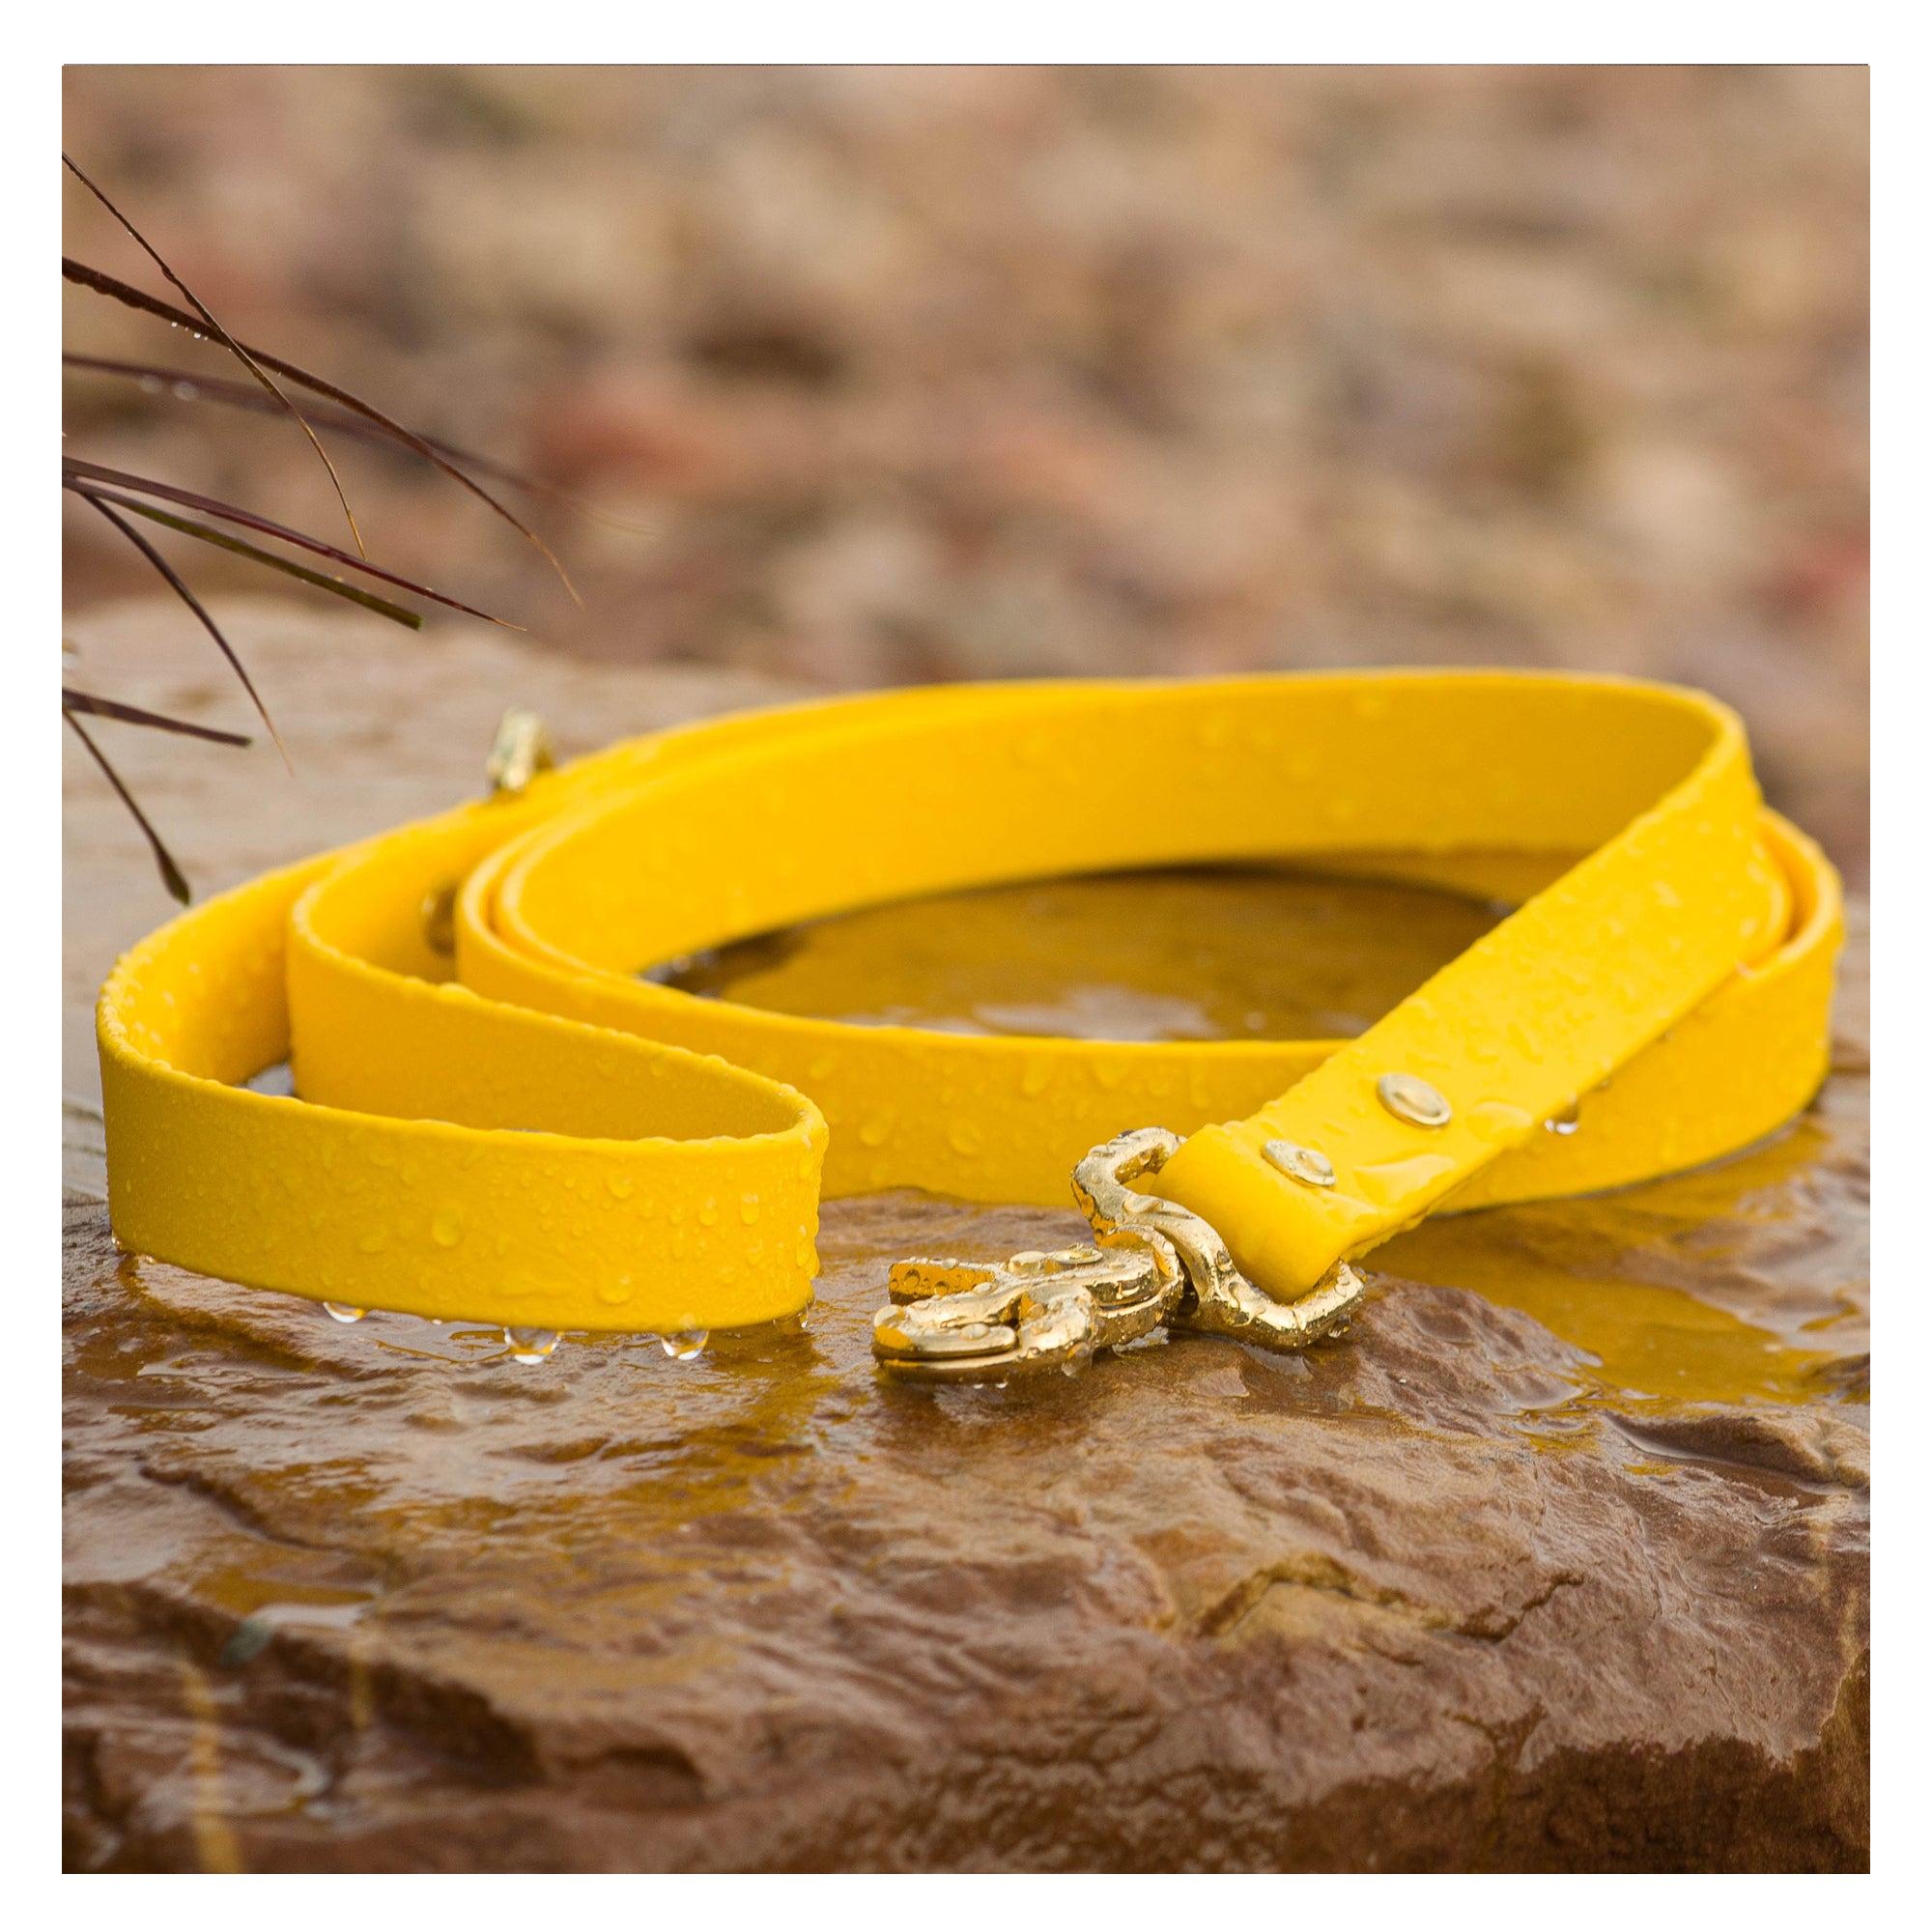 BioThane leash in Yellow with solid brass hardware